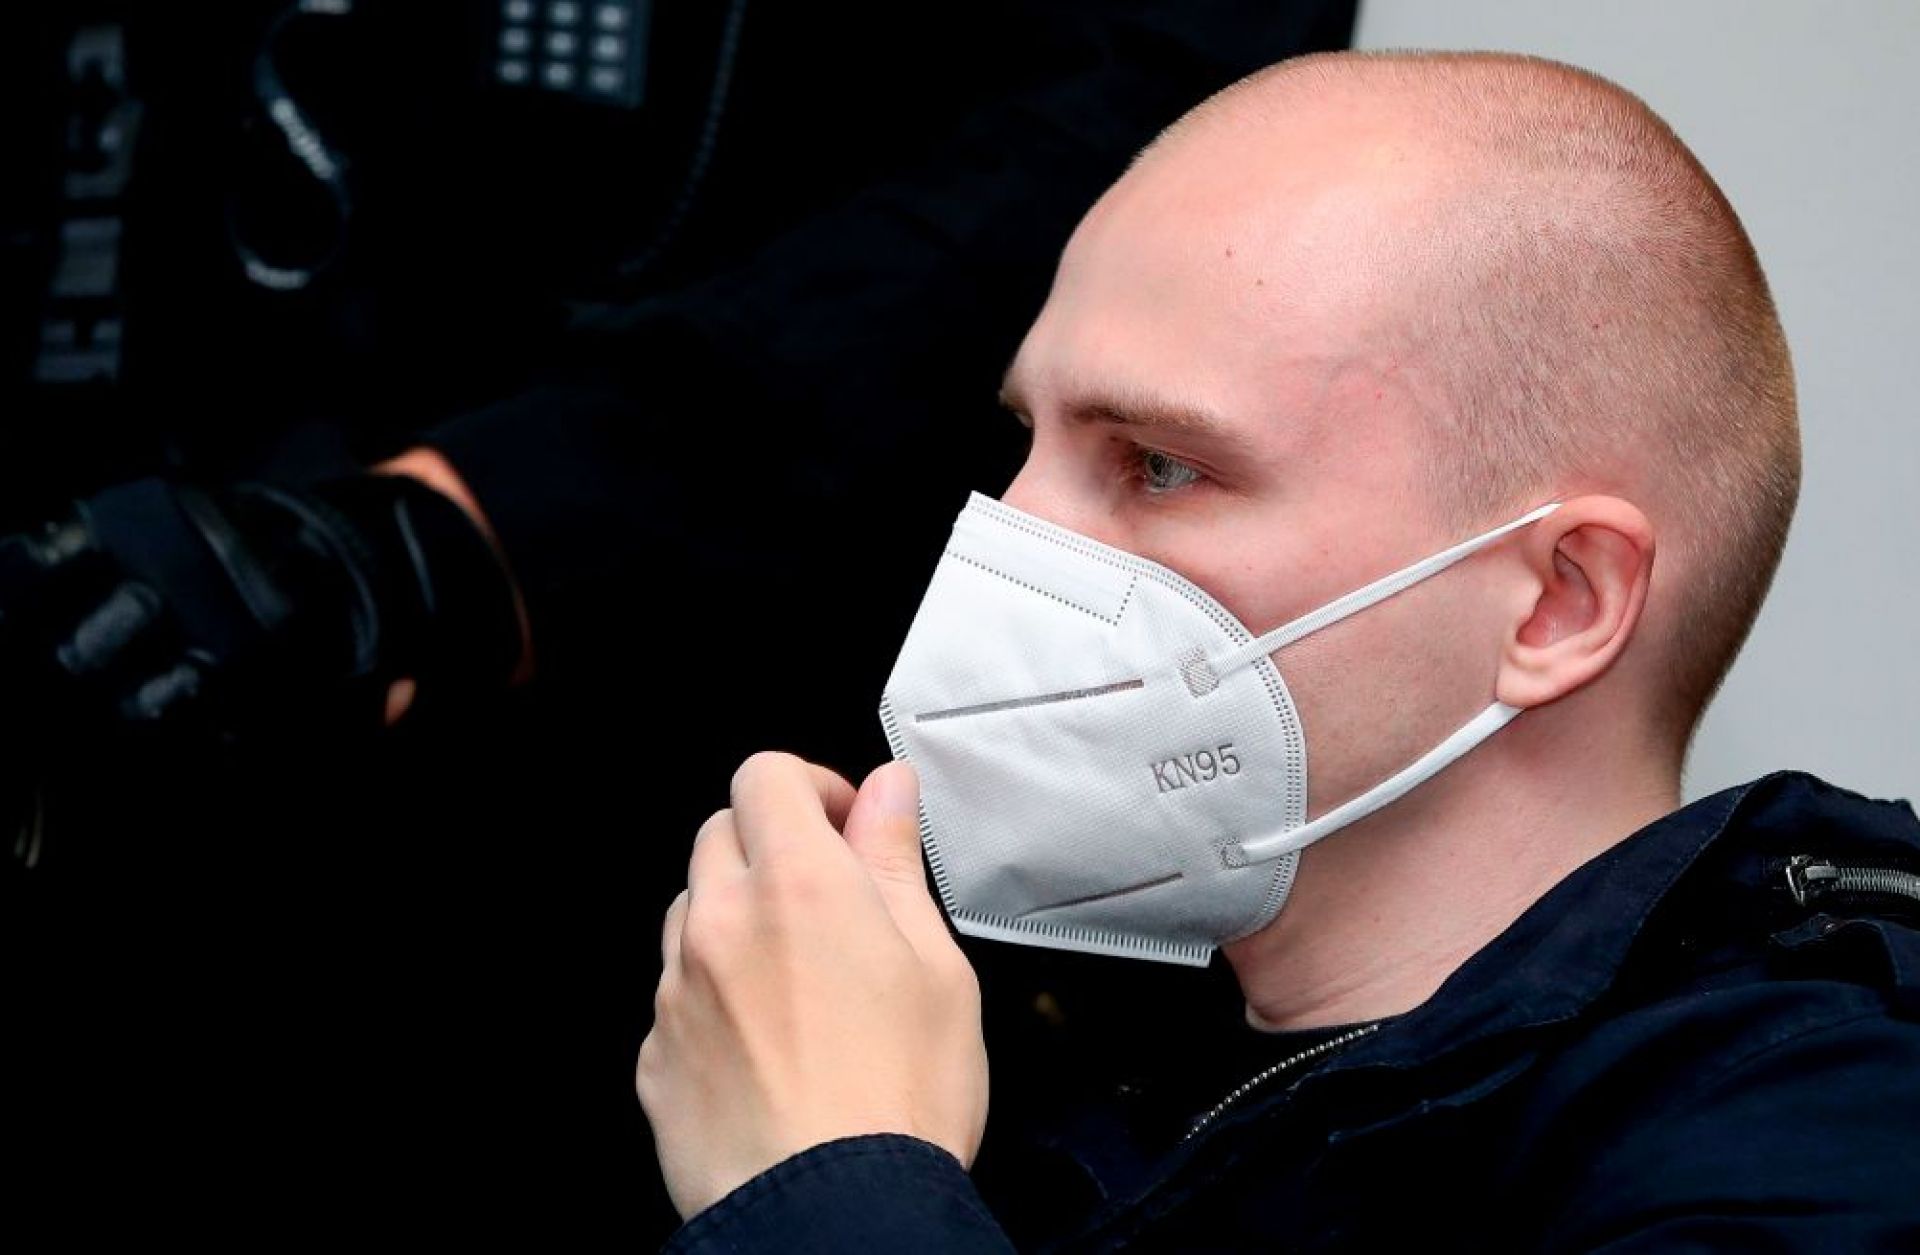 Stephan Balliet, who is accused of shooting two people dead after an attempt to storm a synagogue in Halle an der Saale, eastern Germany, wears a face mask as he waits for the start of the 18th day of his trial on Nov. 3, 2020, at the district court in Magdeburg, eastern Germany.